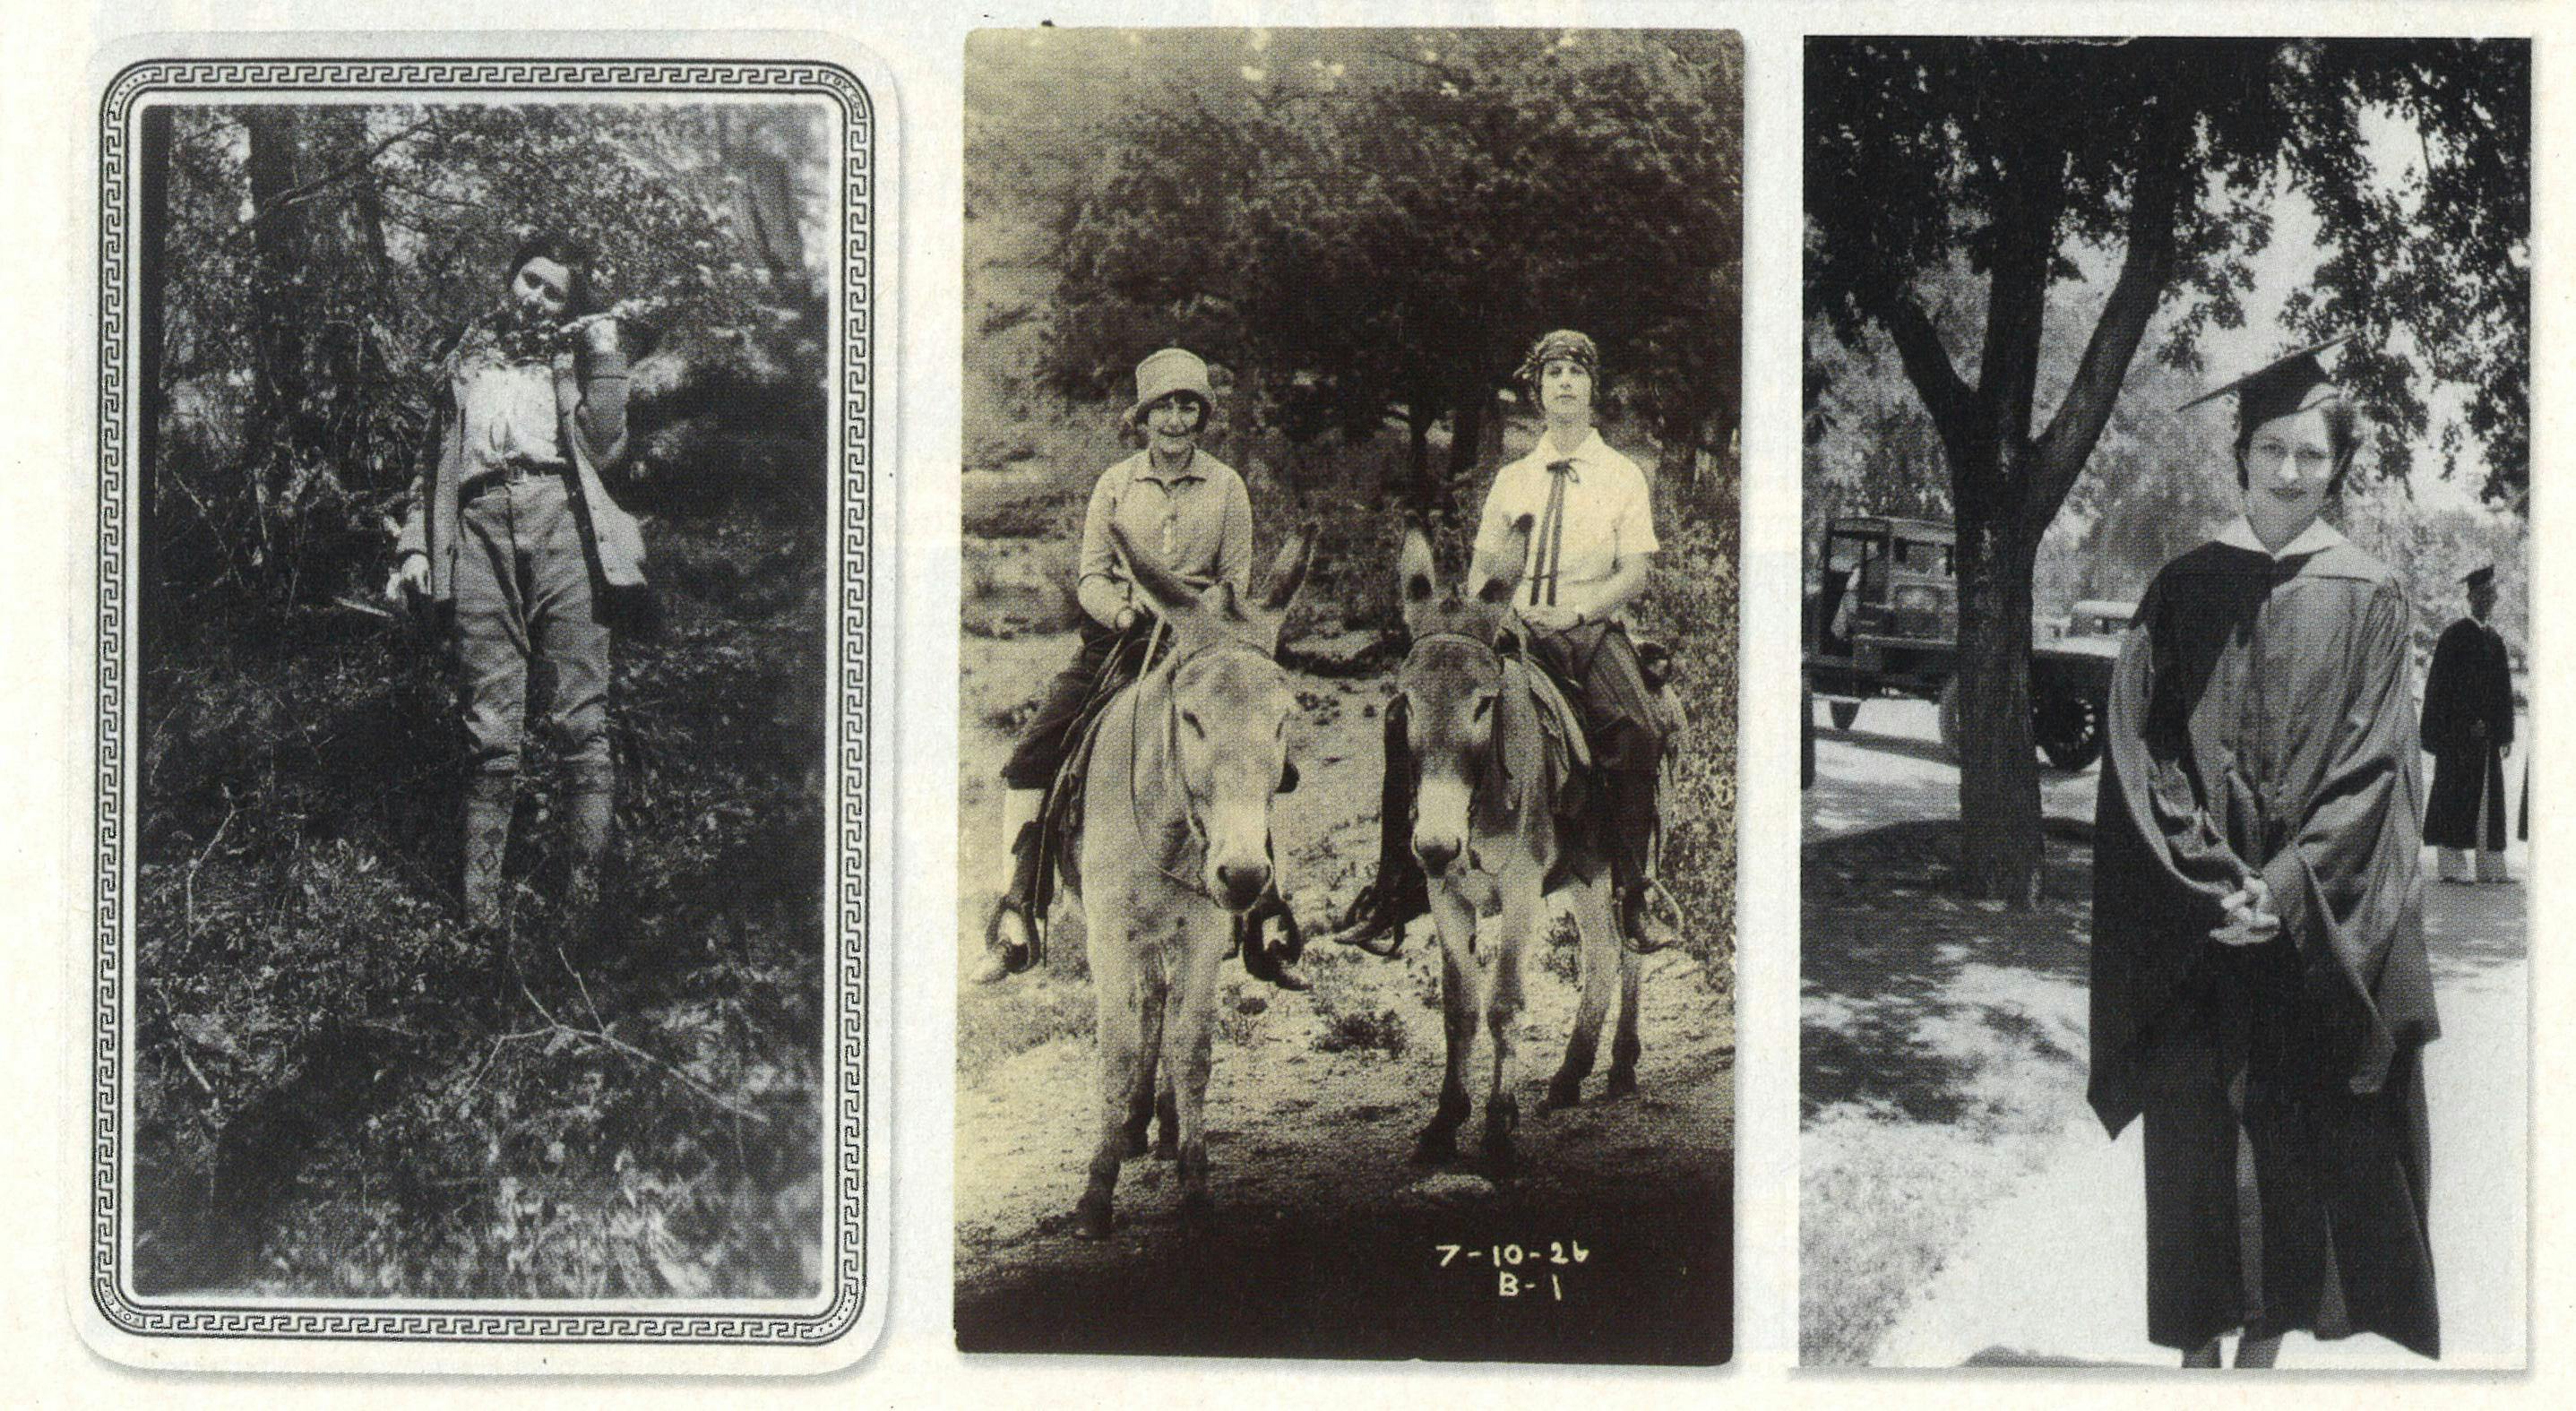 From left: Near Caddo Lake (date unknown). Riding donkeys with a friend in 1926. At her graduation from the University of Texas in 1934.